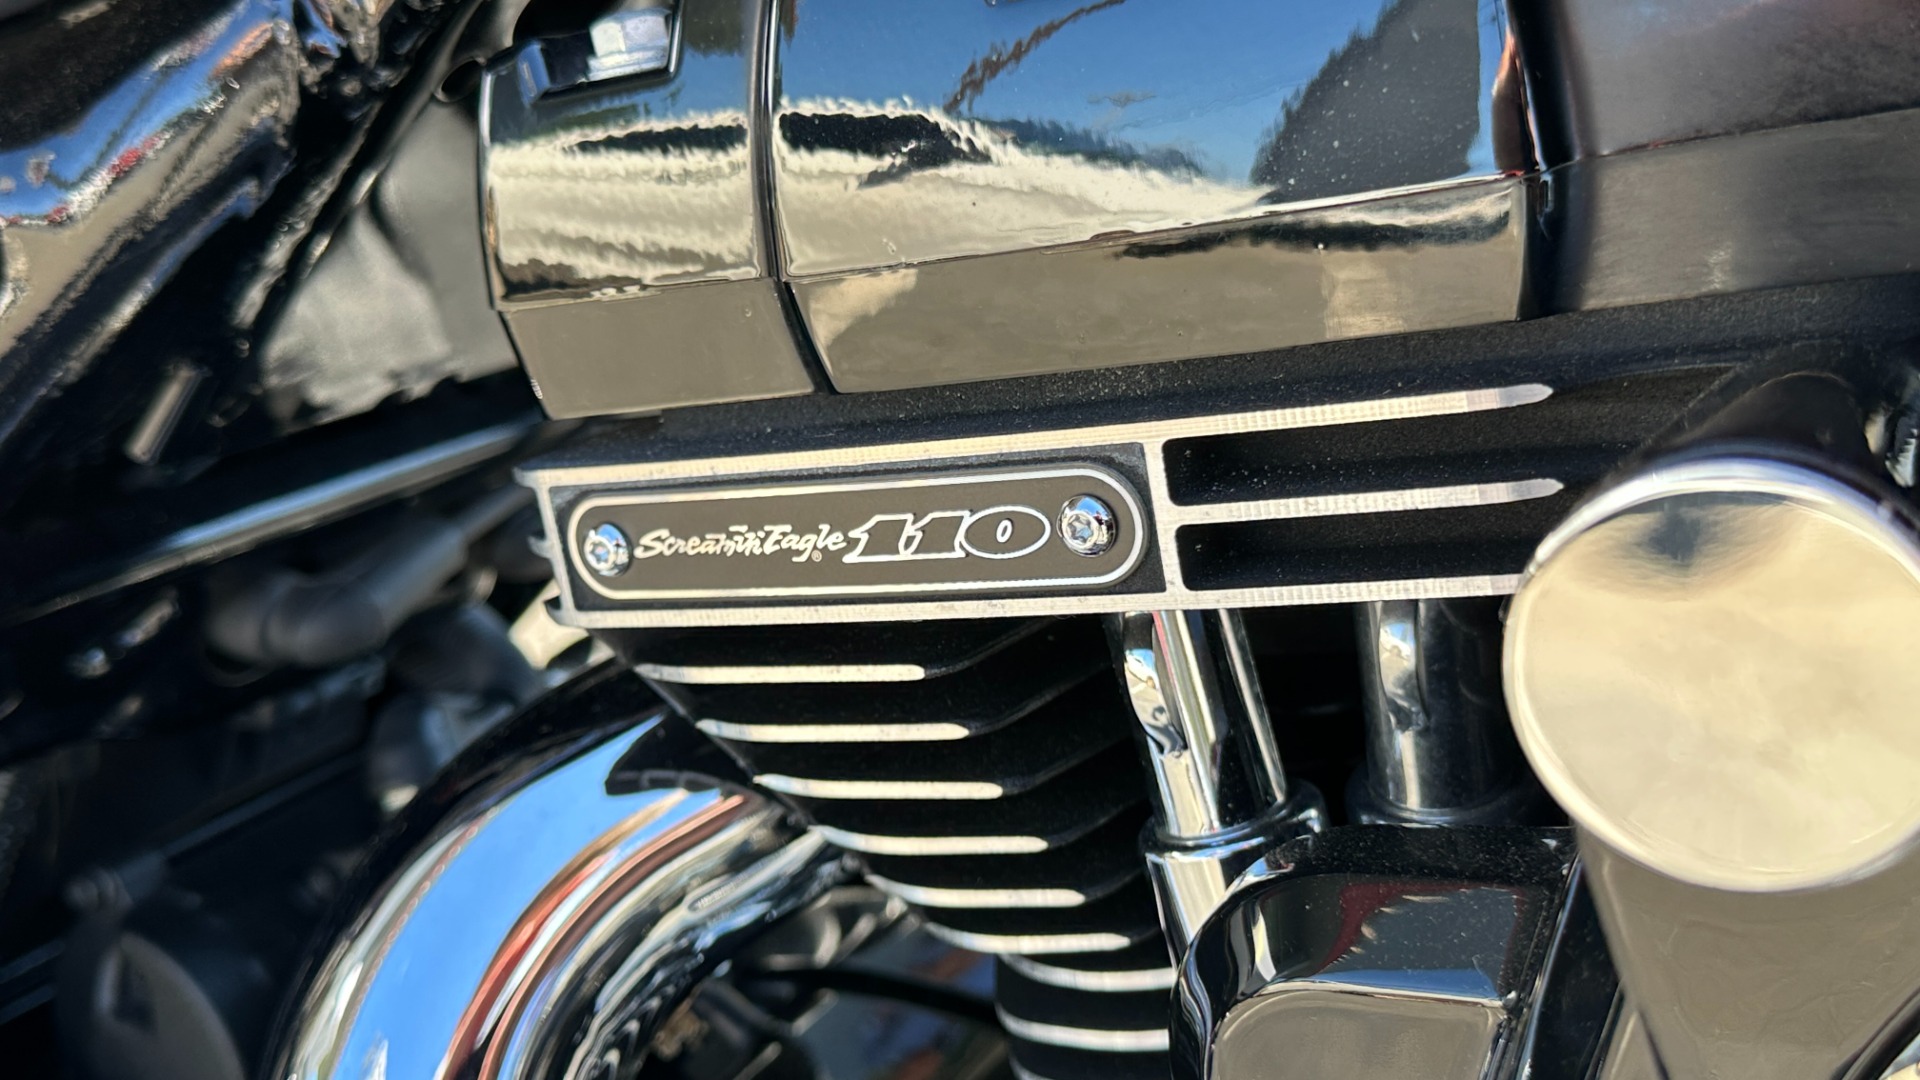 Used 2012 Harley Davidson FLTRXSE CVO Road Glide Custom CVO PAINT / RINEHART EXHAUST / SCREAMING EAGLE 110 ENGINE for sale $32,000 at Formula Imports in Charlotte NC 28227 23